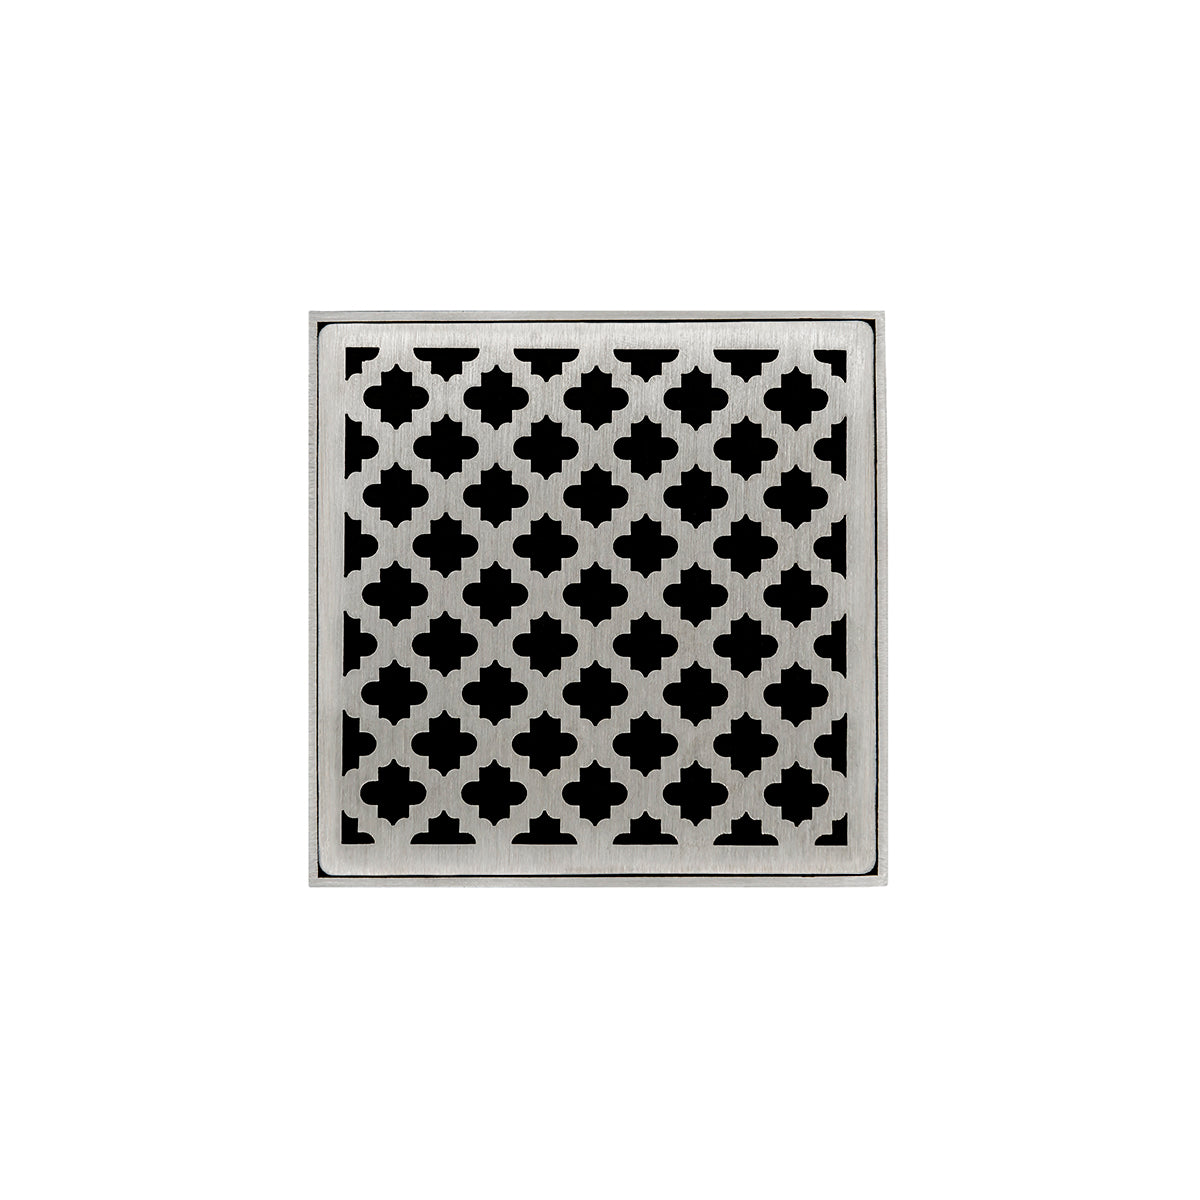 Infinity Drain 5" x 5" MDB 5 Premium Center Drain Kit with Moor Pattern Decorative Plate with Stainless Steel Bonded Flange Drain Body, 2" No Hub Outlet